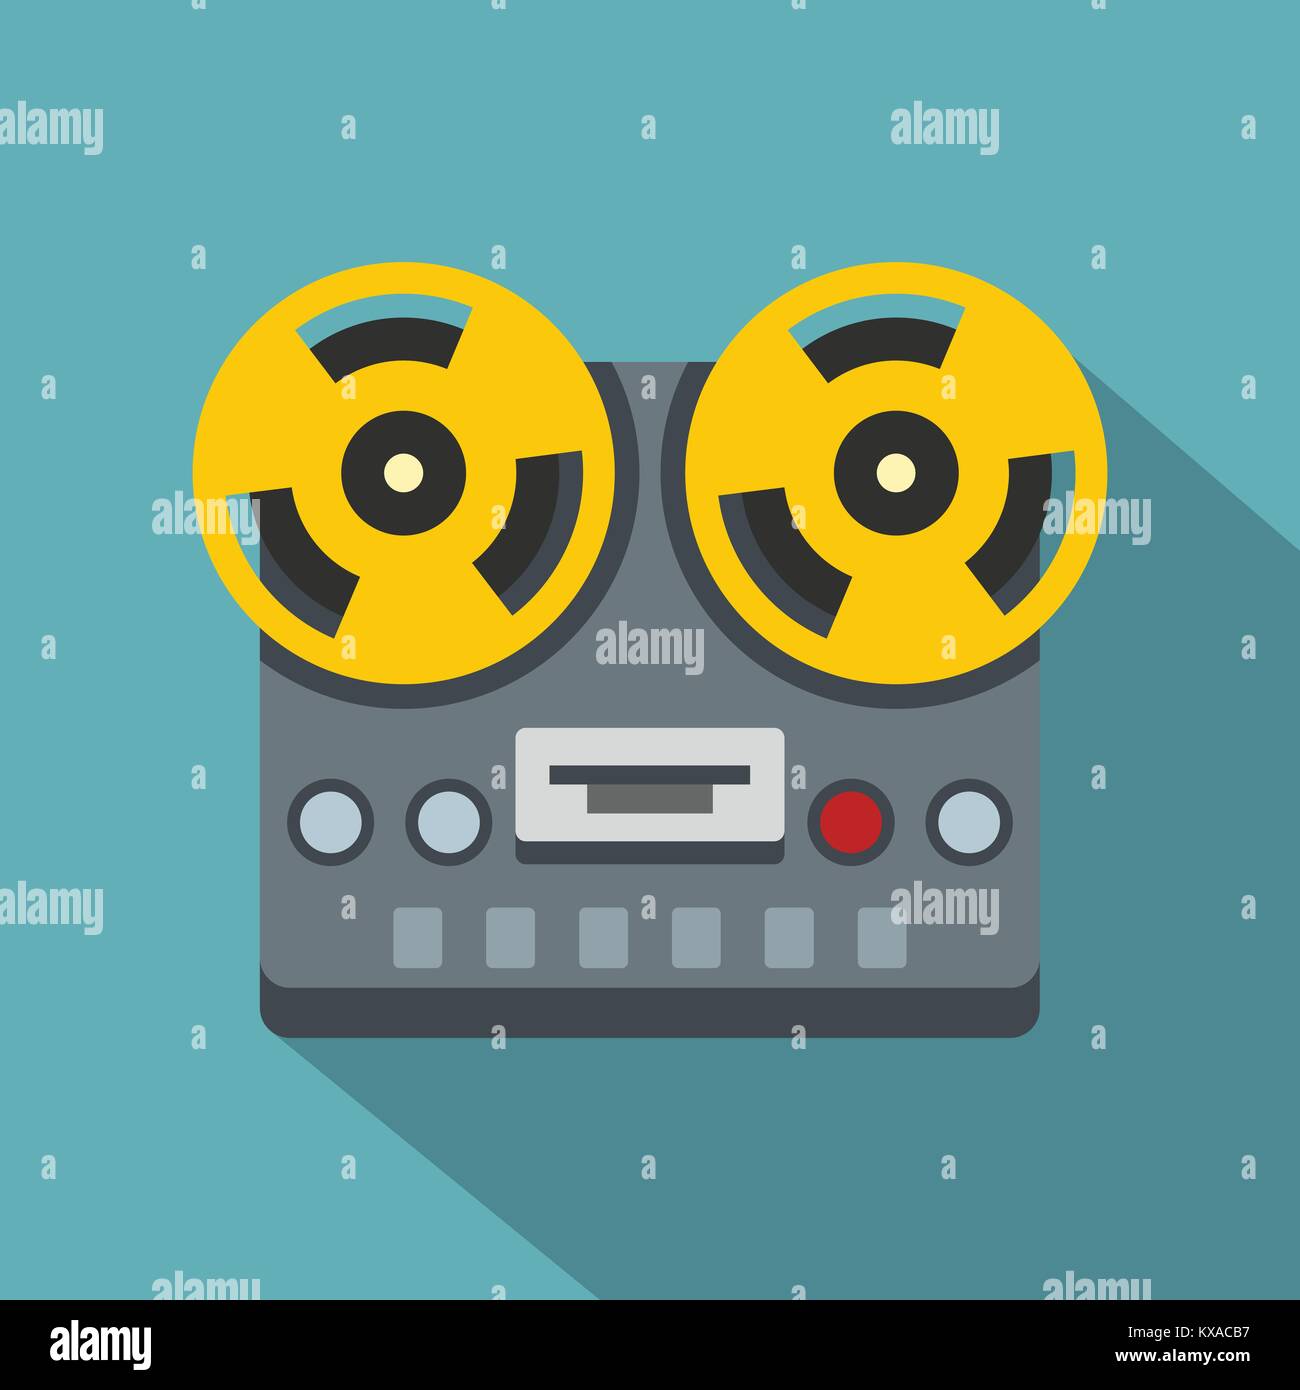 Vintage reel to reel tape recorder deck icon Stock Vector